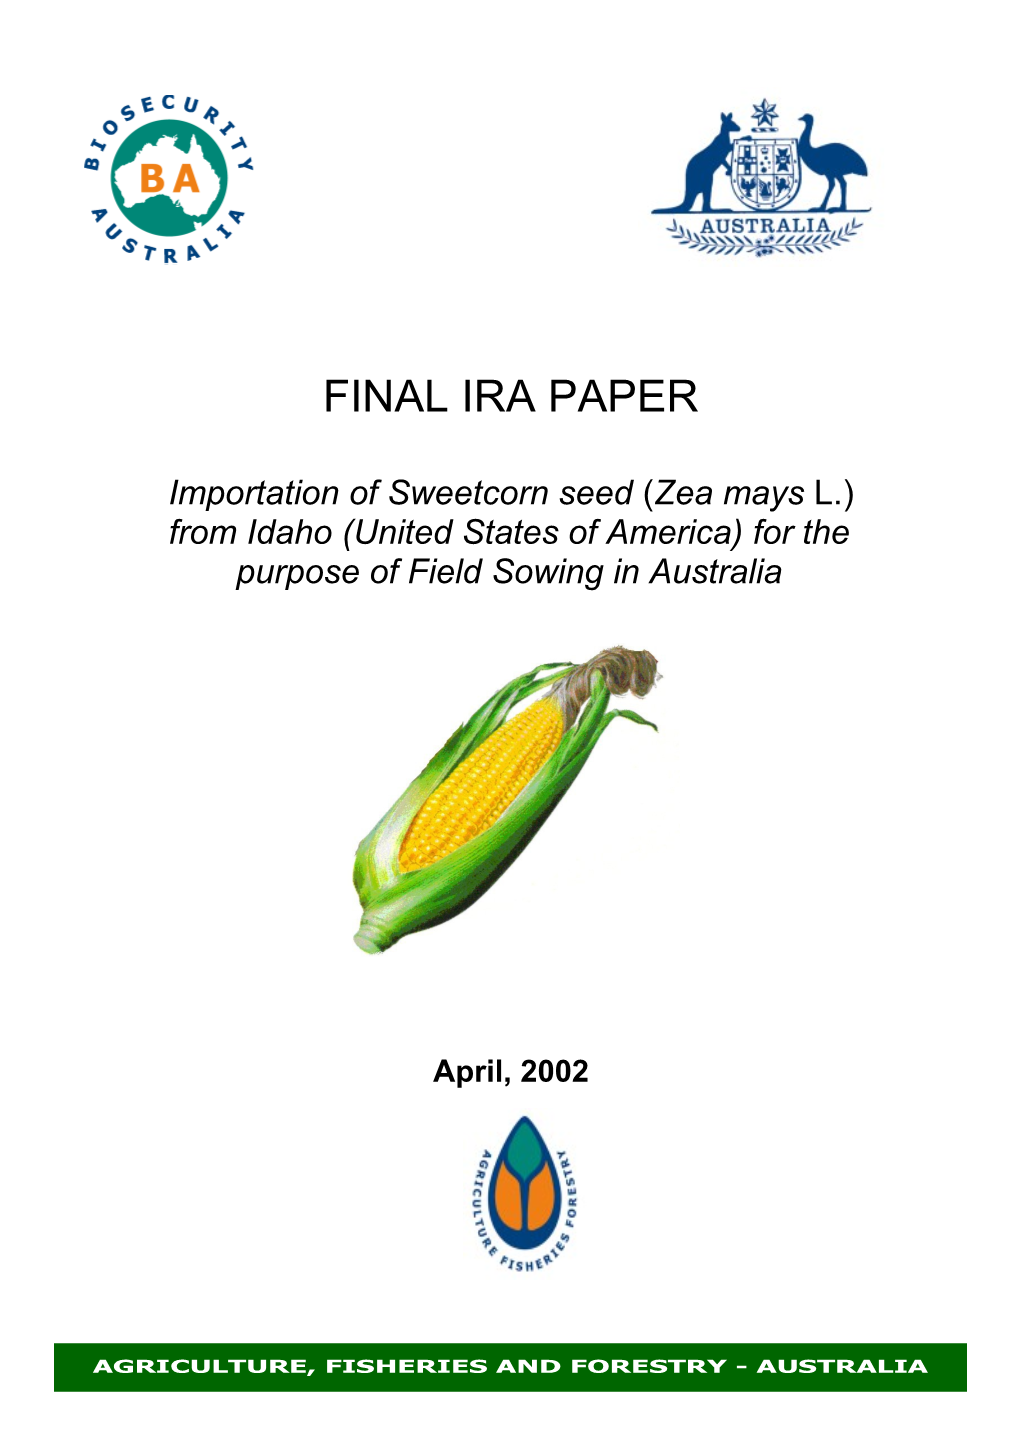 Final IRA Paper: Importation of Sweetcorn Seed for Sowing from Idaho